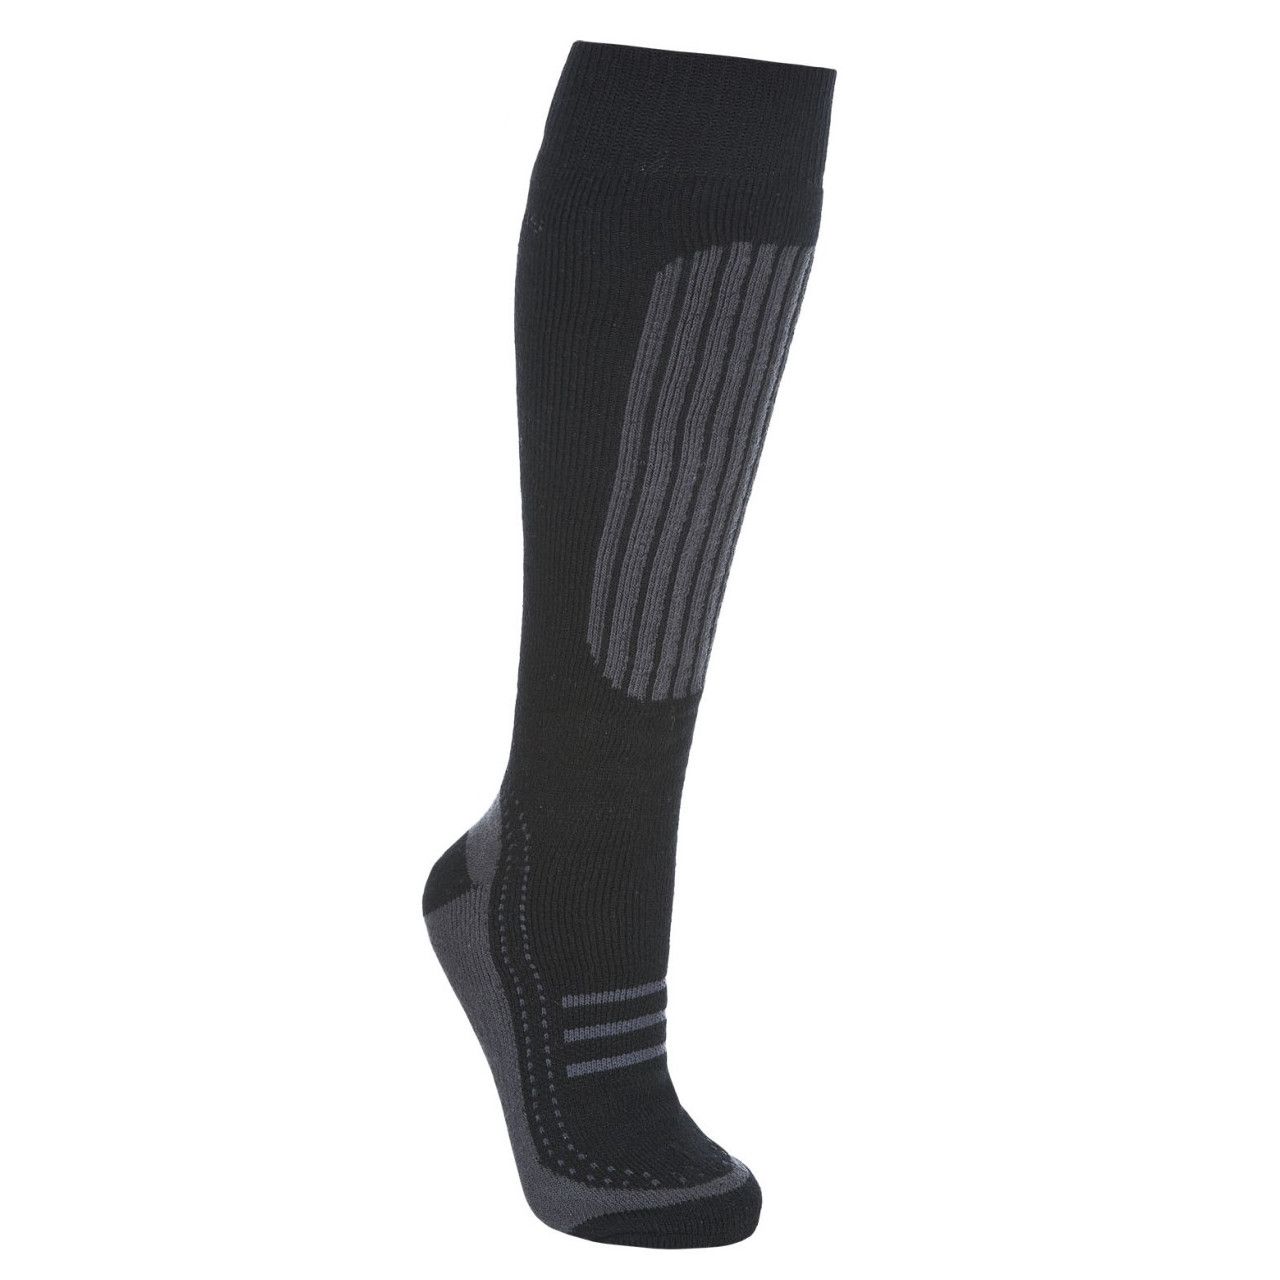 2 pair pack. Long length technical ski sock. Comfort fit. Arch support. Extra cushioning. 91% Acrylic, 8% Polyamide, 1% Elastane.